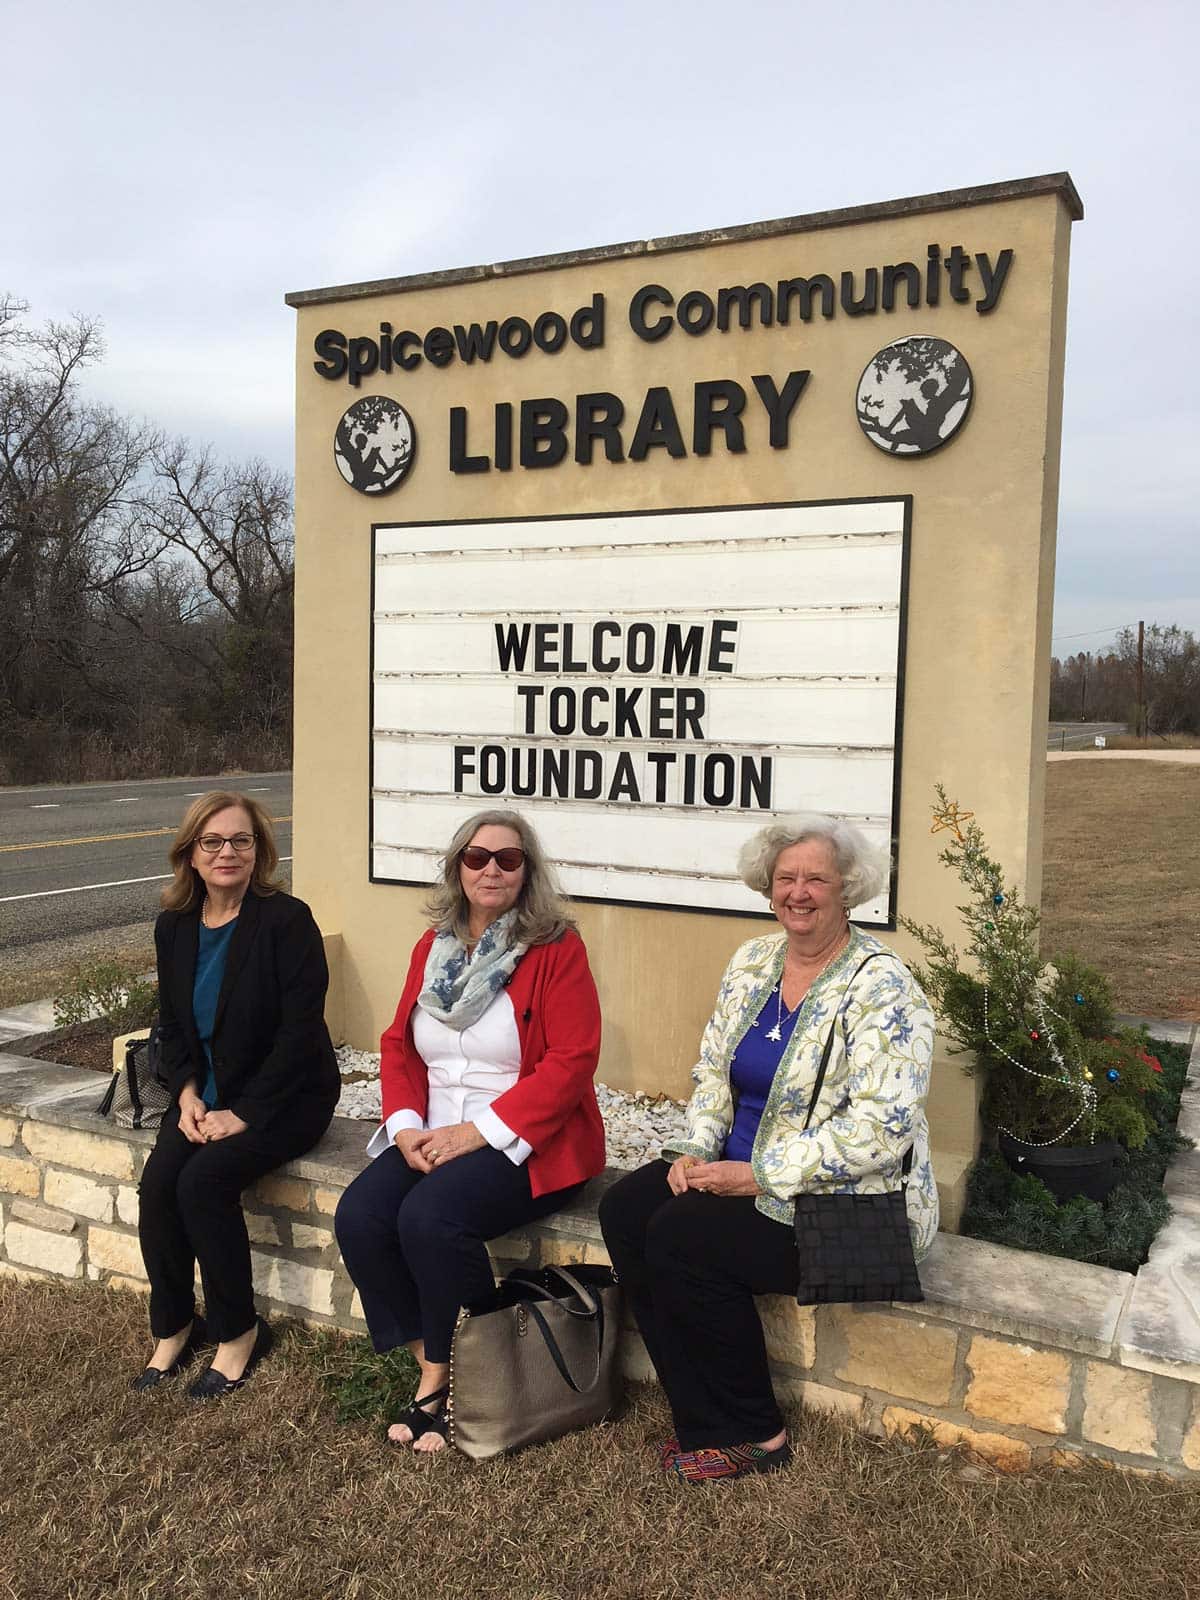 Spicewood community library welcomes Tocker Foundation